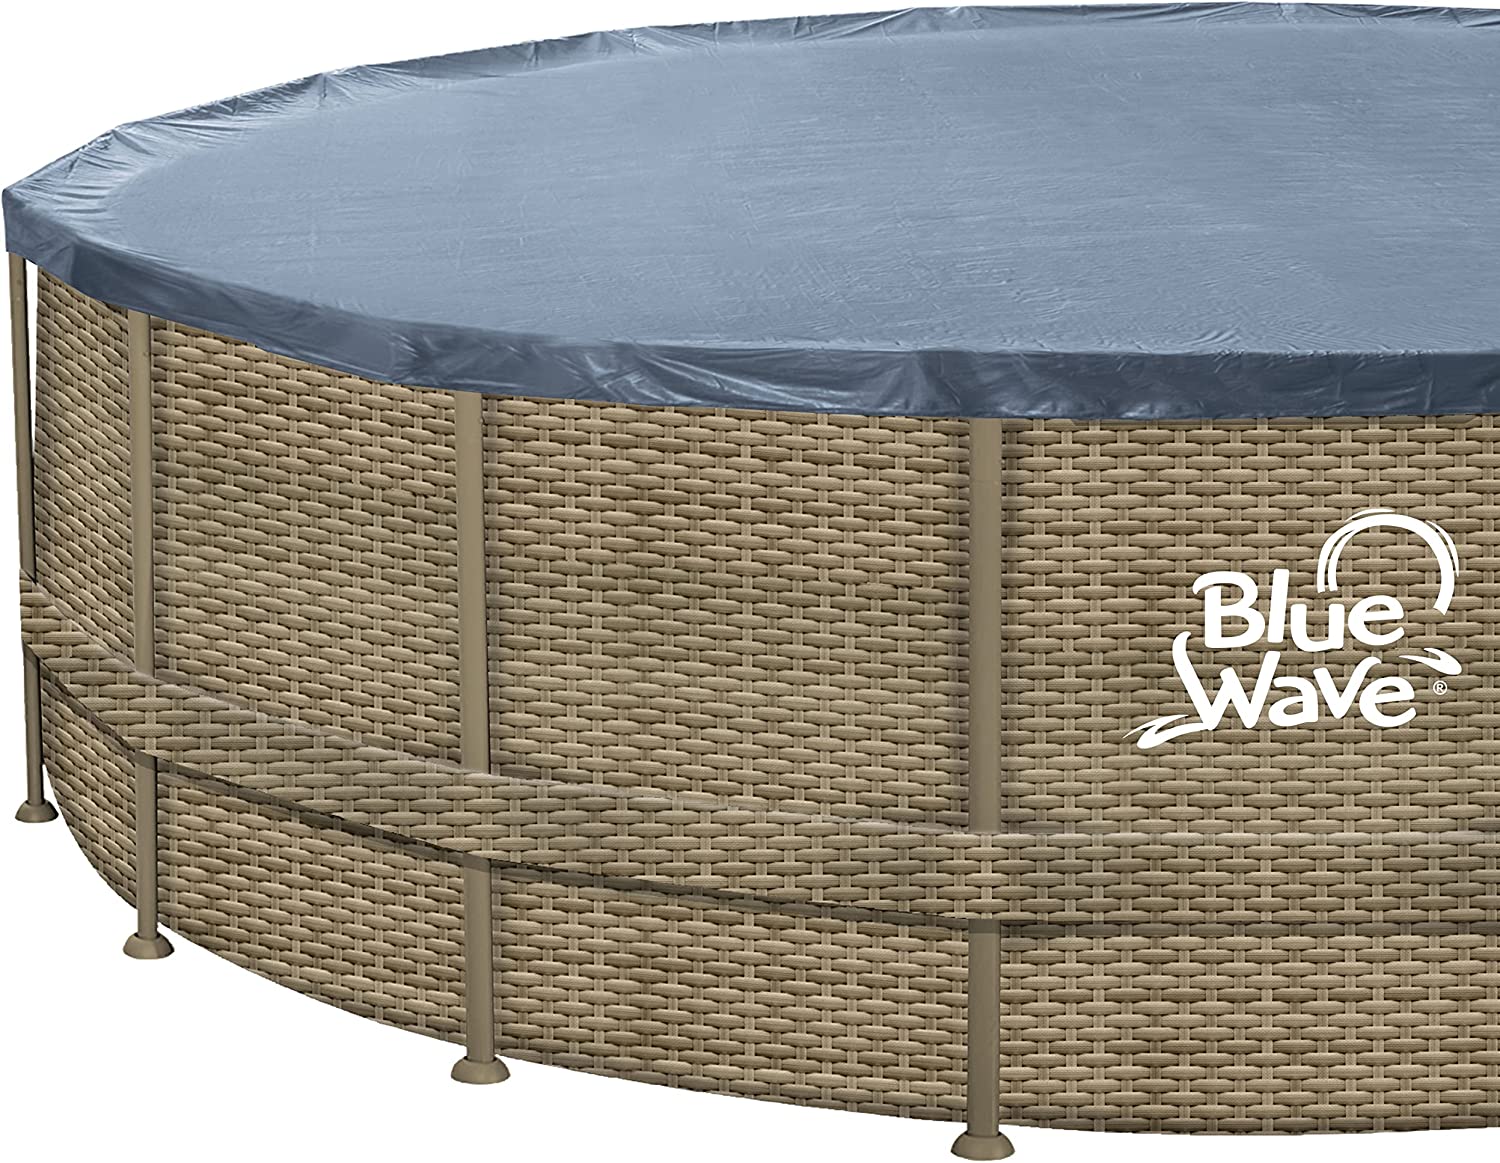 Blue Wave NB19797 18-ft Round 52" Deep Dark Cocoa Wicker Frame Above Ground Pool w/ Cover, Brown - $600